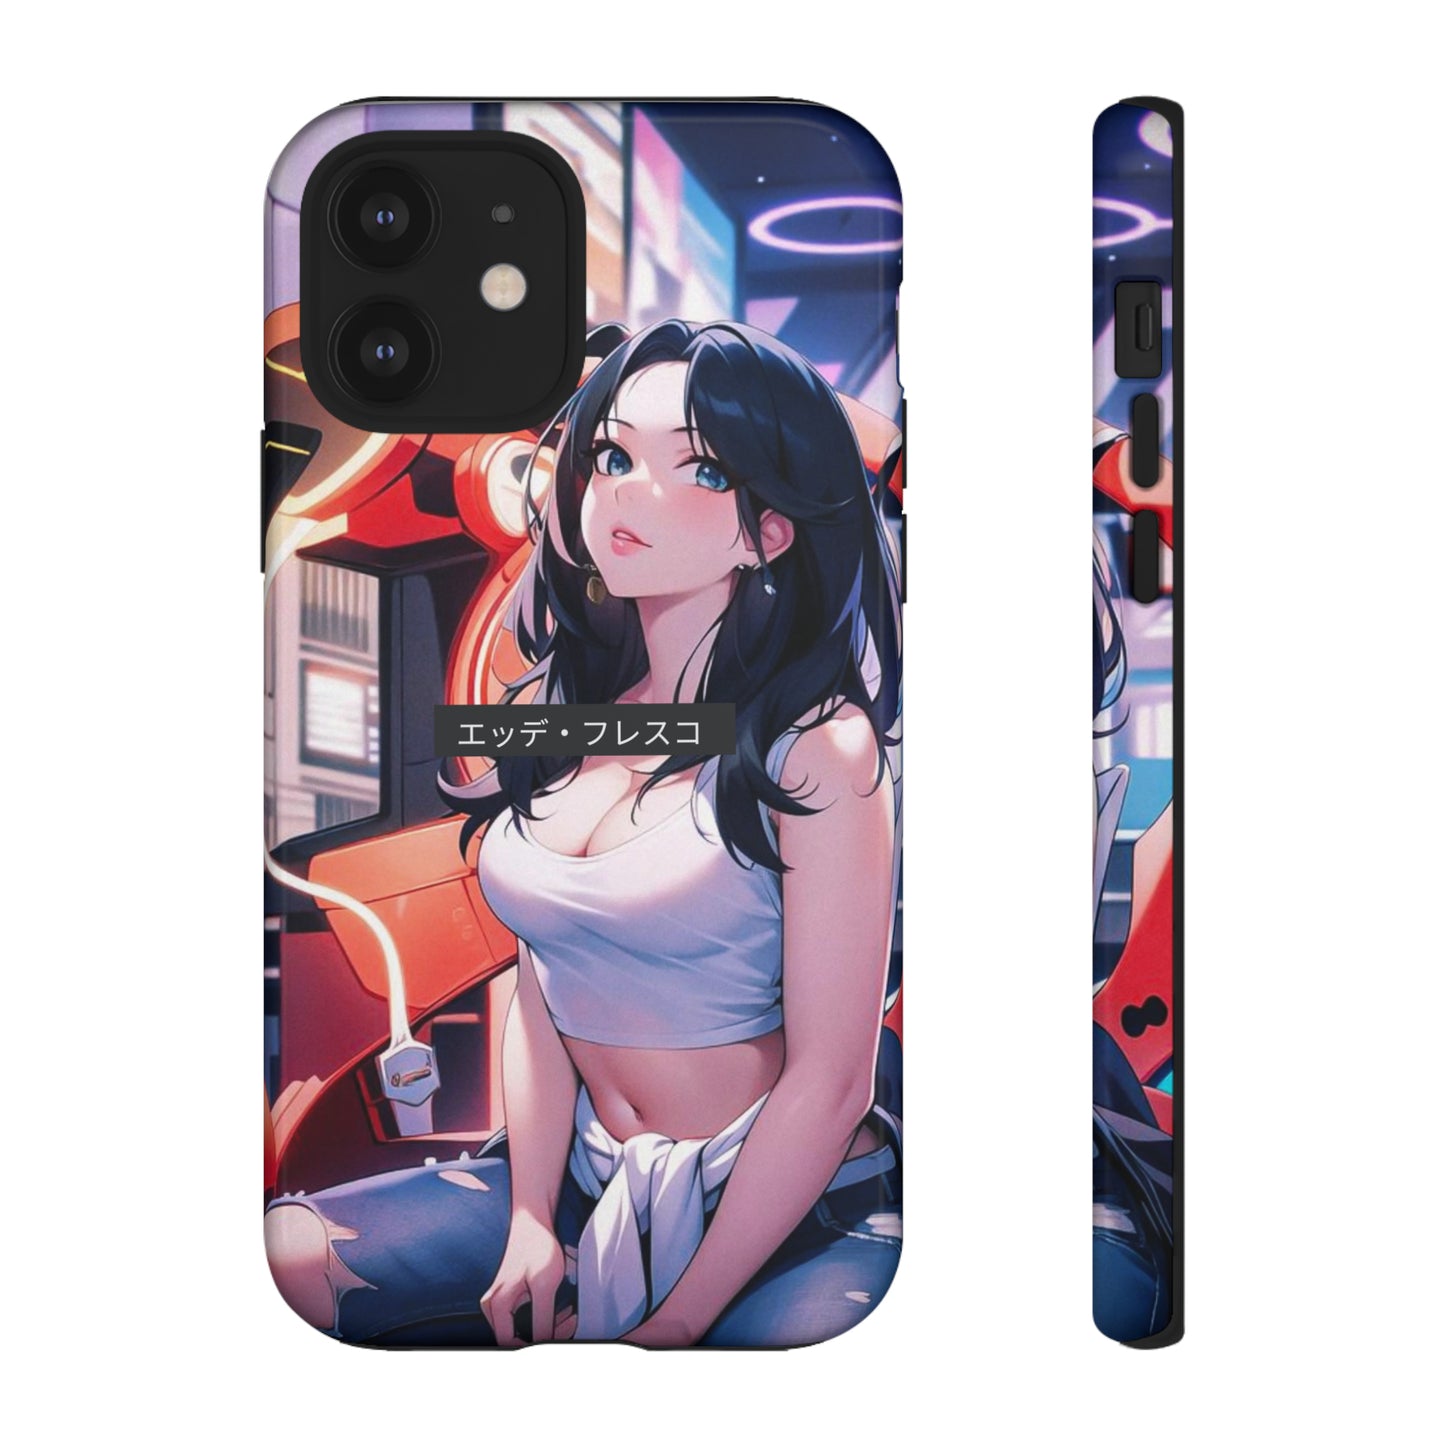 Anime Style Art Tough Cases- "She's at the Arcade"